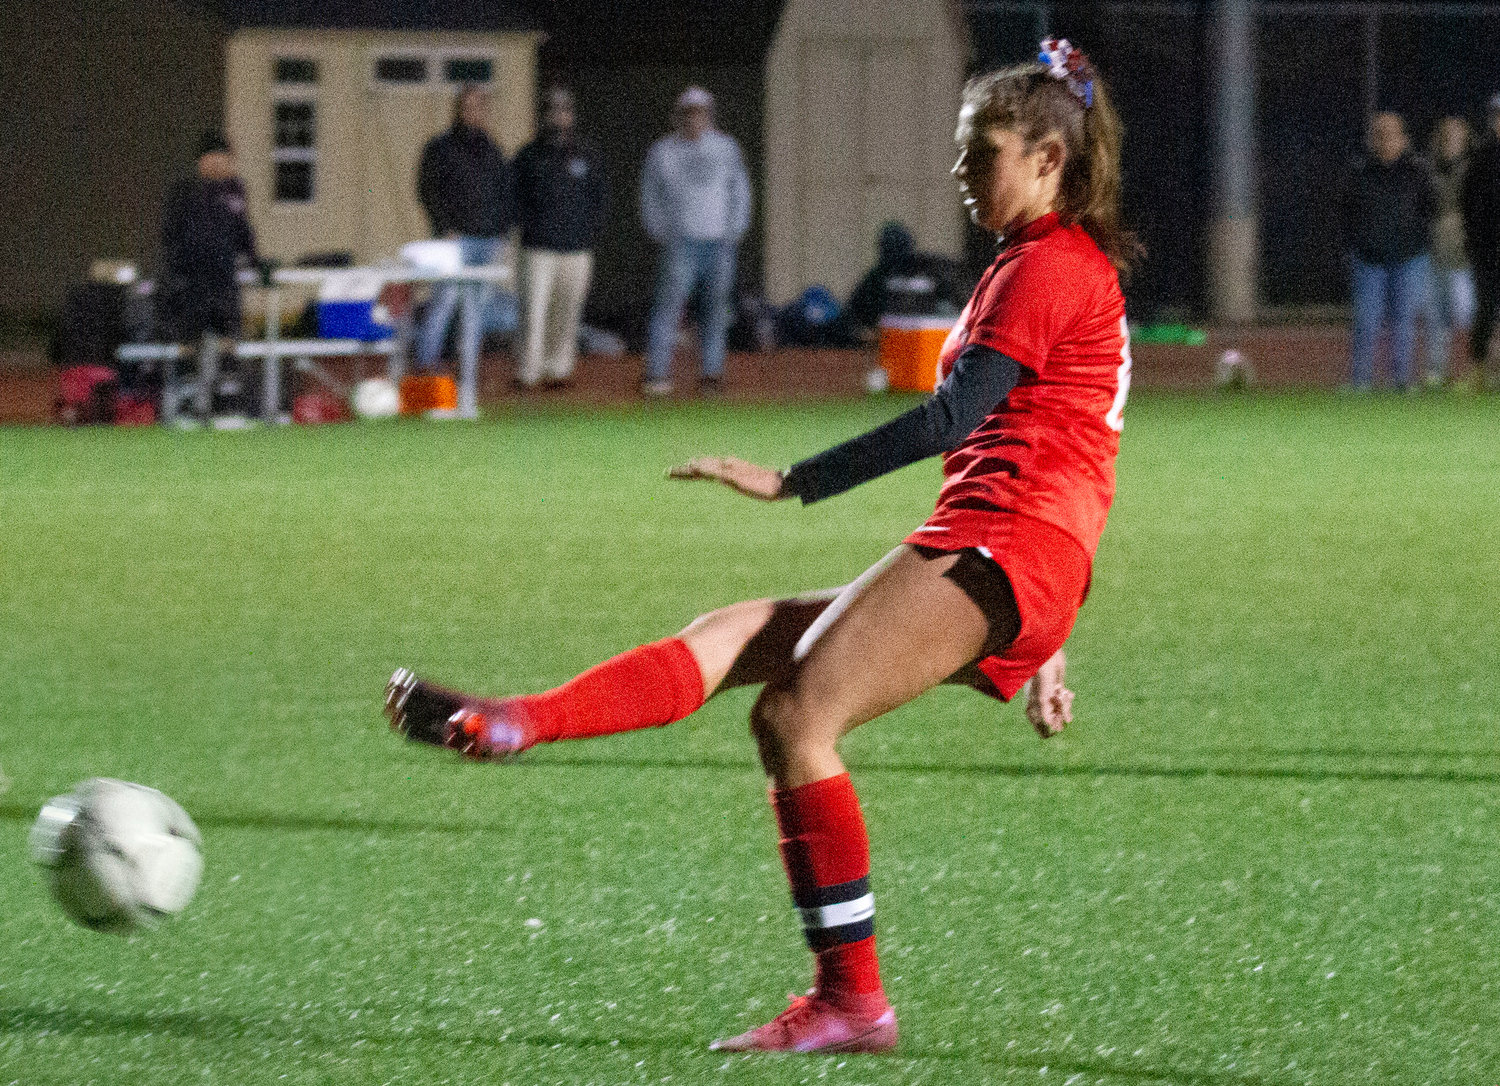 Kaitlin Roche boots in a penalty kick in the second half.